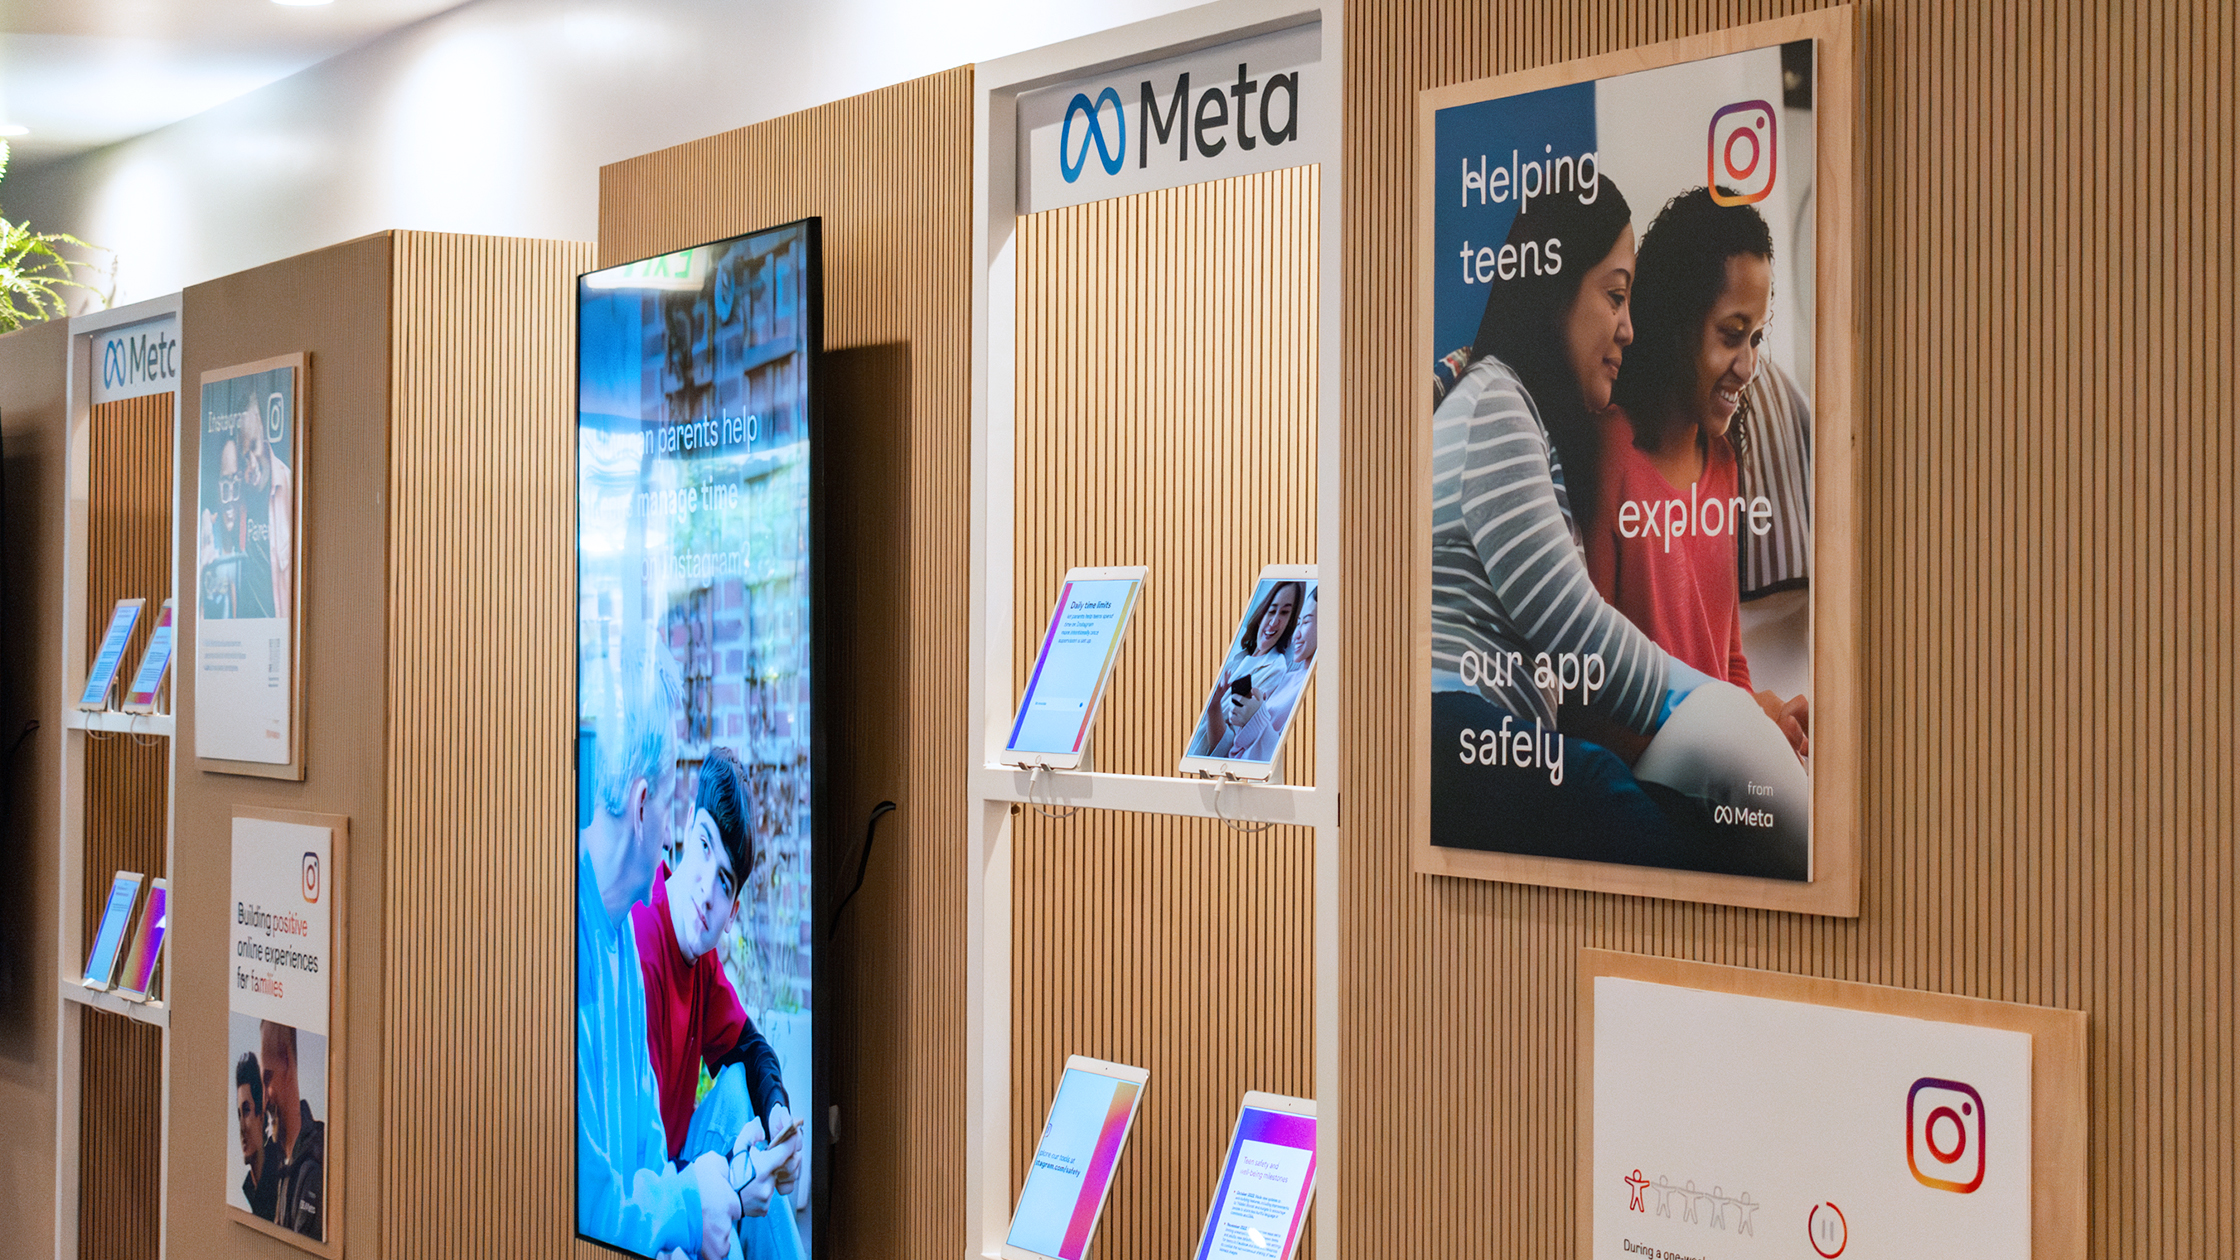 A display area with wooden paneling showcasing Meta's initiatives, including a large monitor and posters. One poster reads "Helping teens explore our app safely" with an image of two individuals. Various informative materials are placed on shelves below the posters.